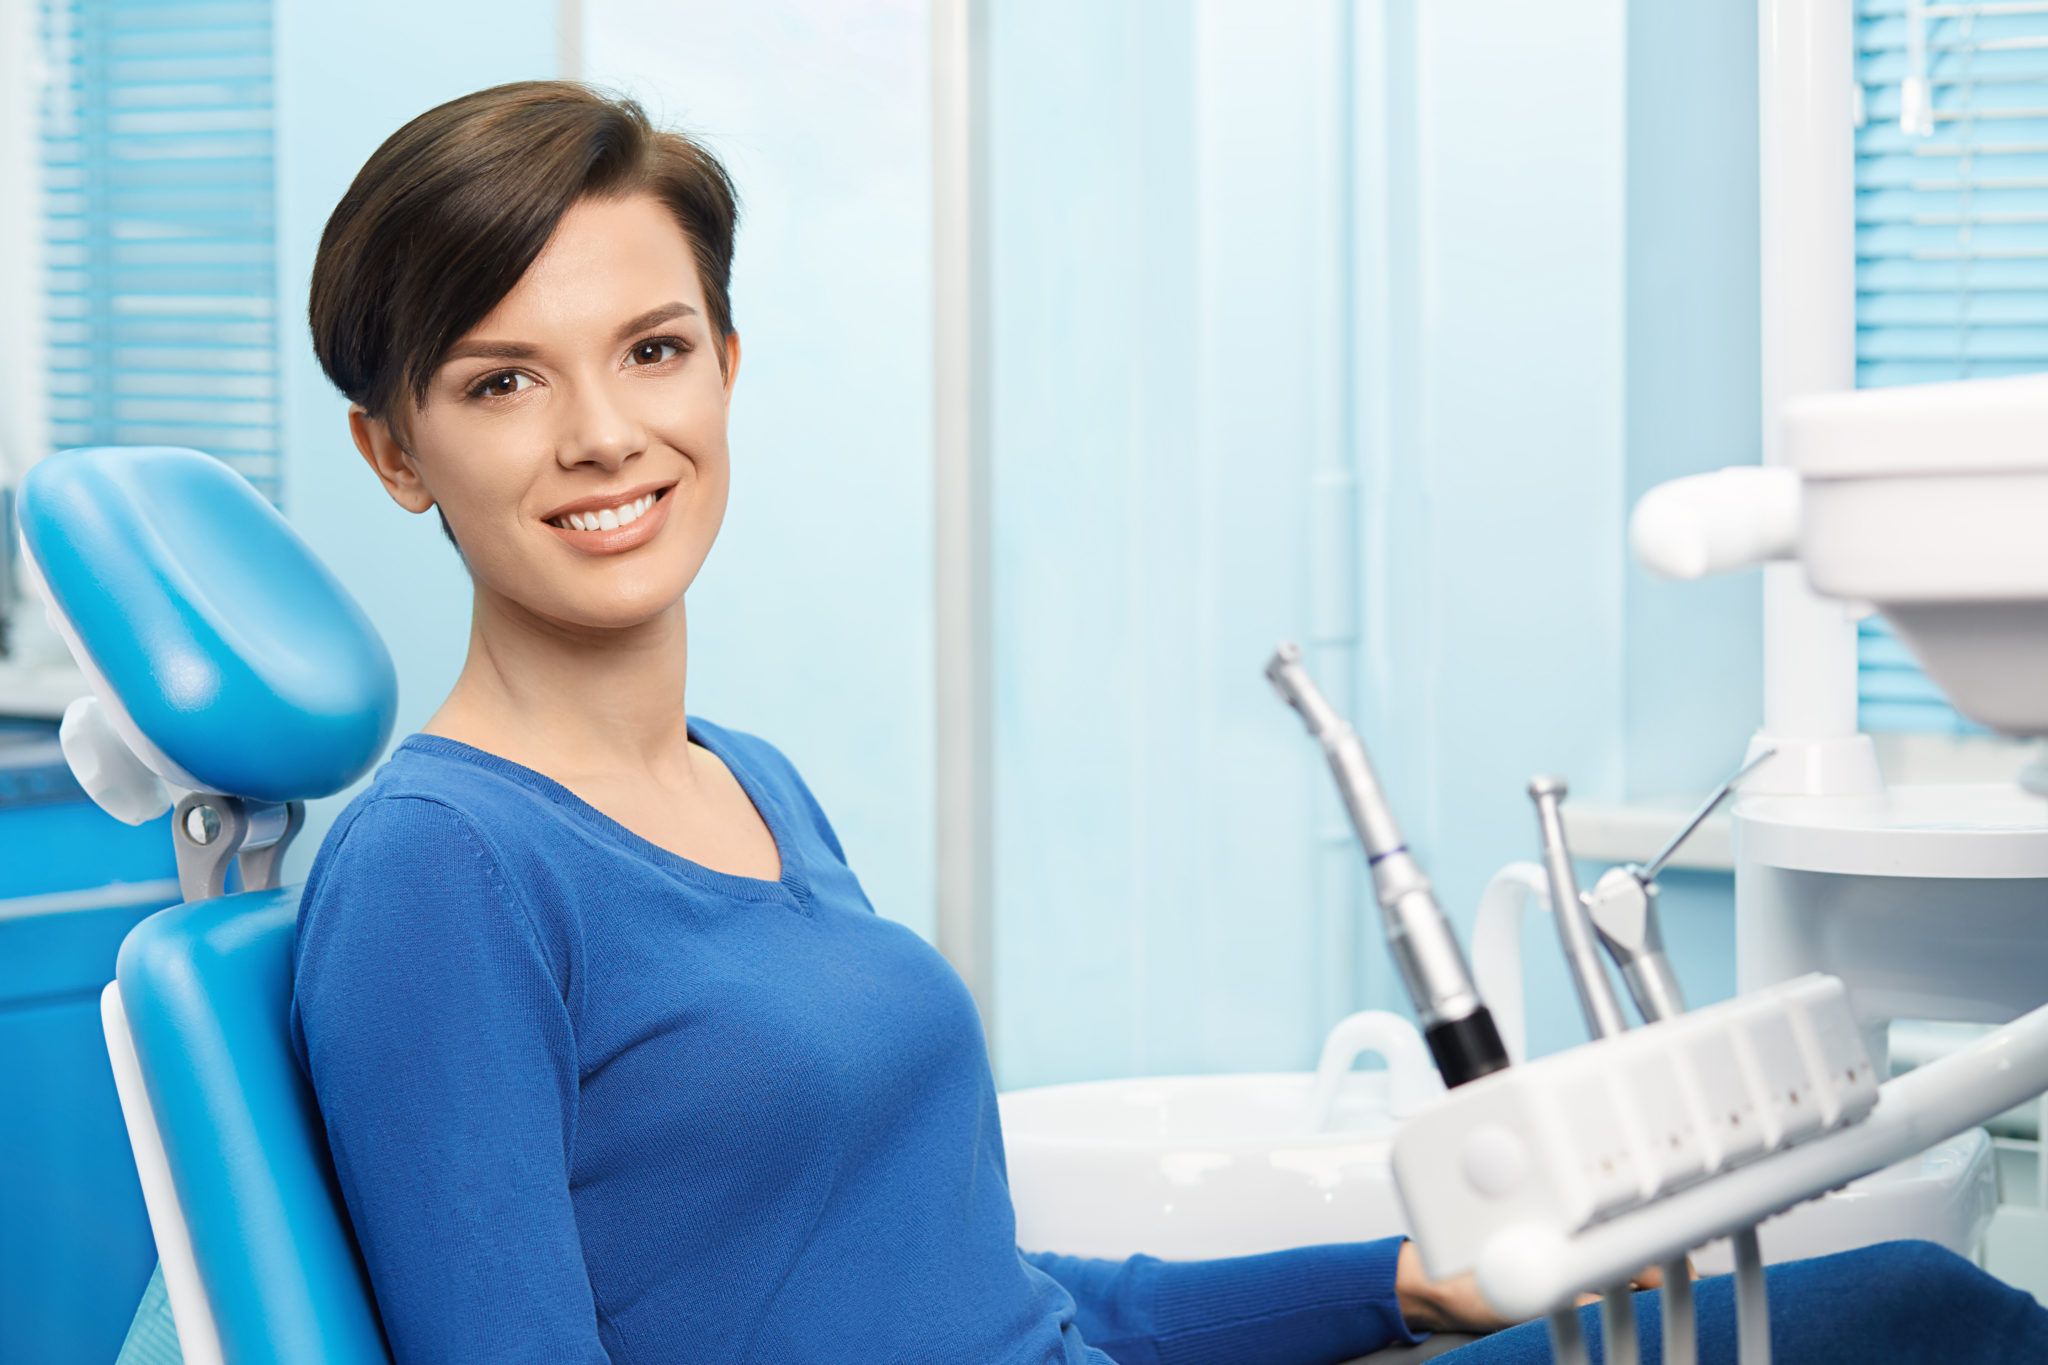 Smiling woman in dentist's chair